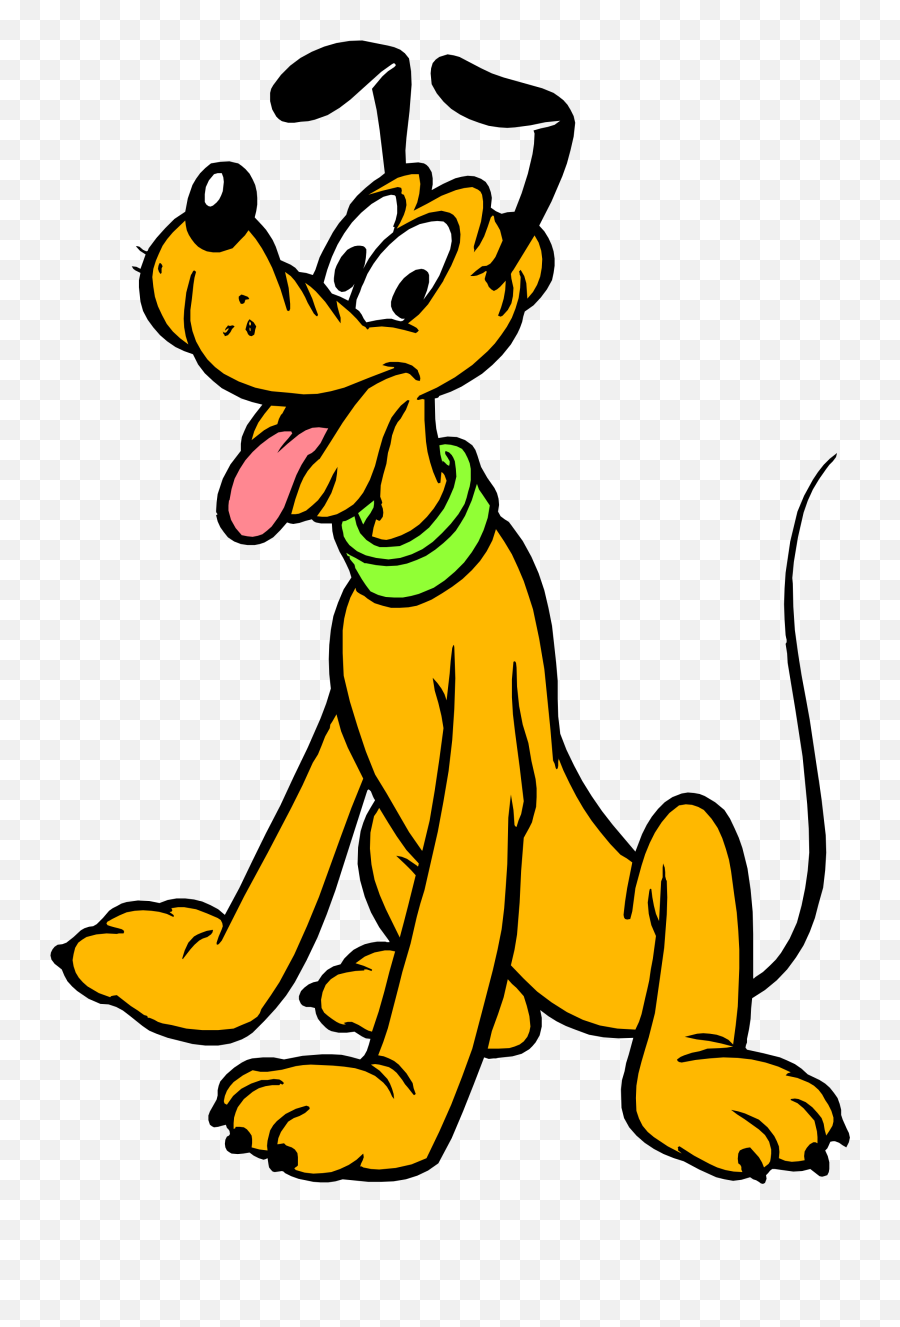 Download Pluto Photo Hq Png Image - Pluto Off Mickey Mouse,Pluto Png